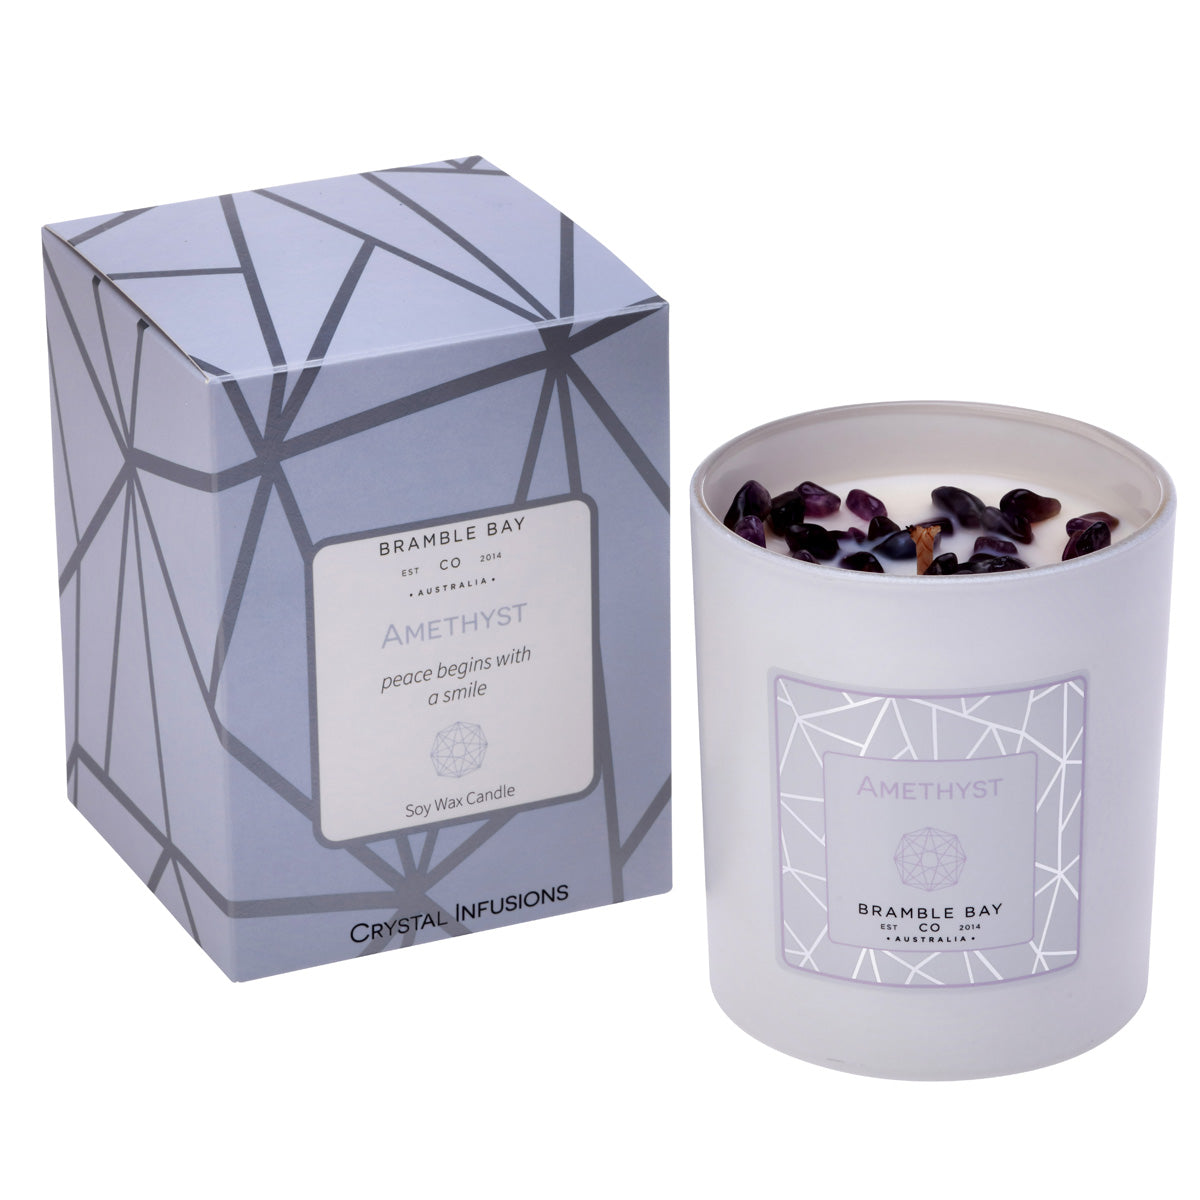 Amethyst Crystal Infusions Candle